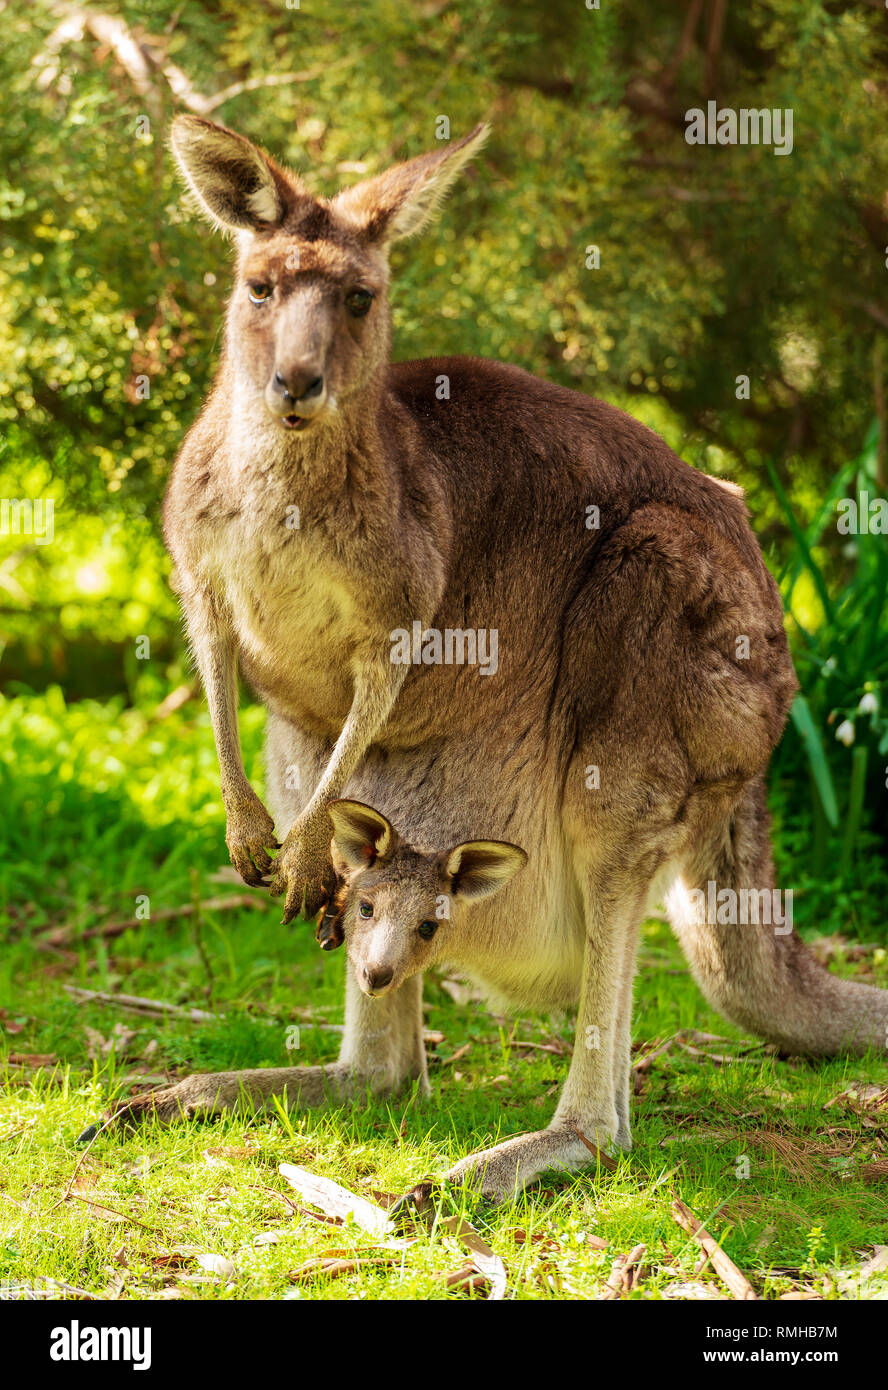 marsupial babies in pouch